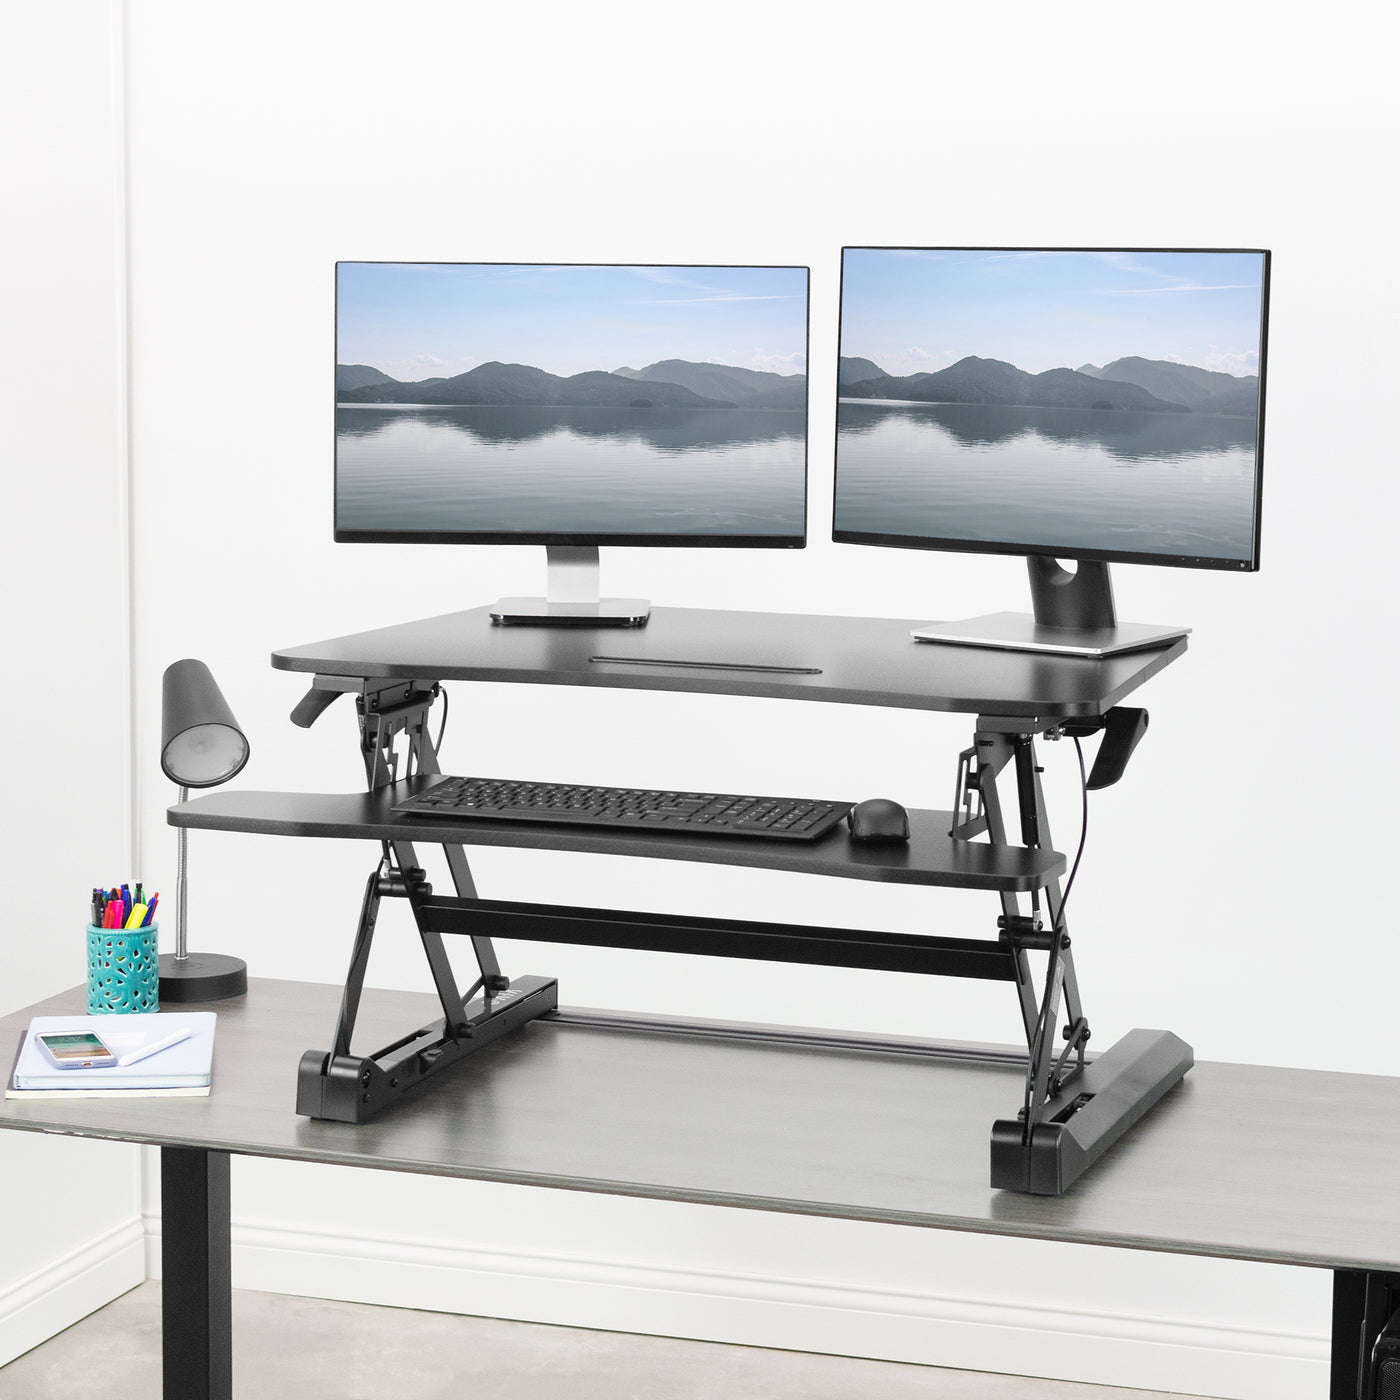 Heavy-duty height adjustable desk converter monitor riser with 2 tiers. 